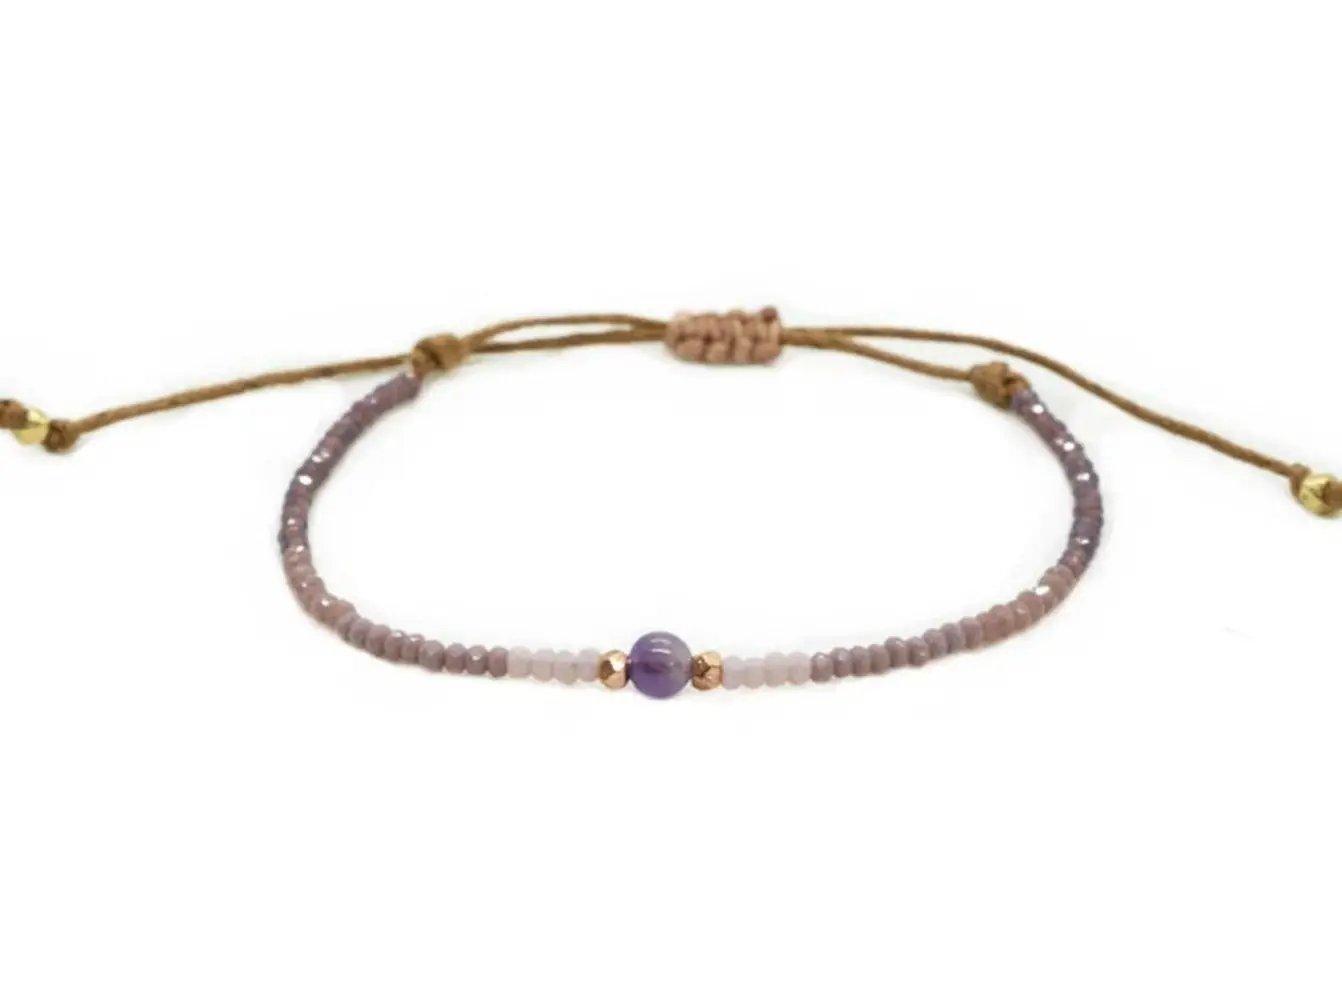  Amethyst and Crystal Stone Goddess Bracelet from Lotus and Luna